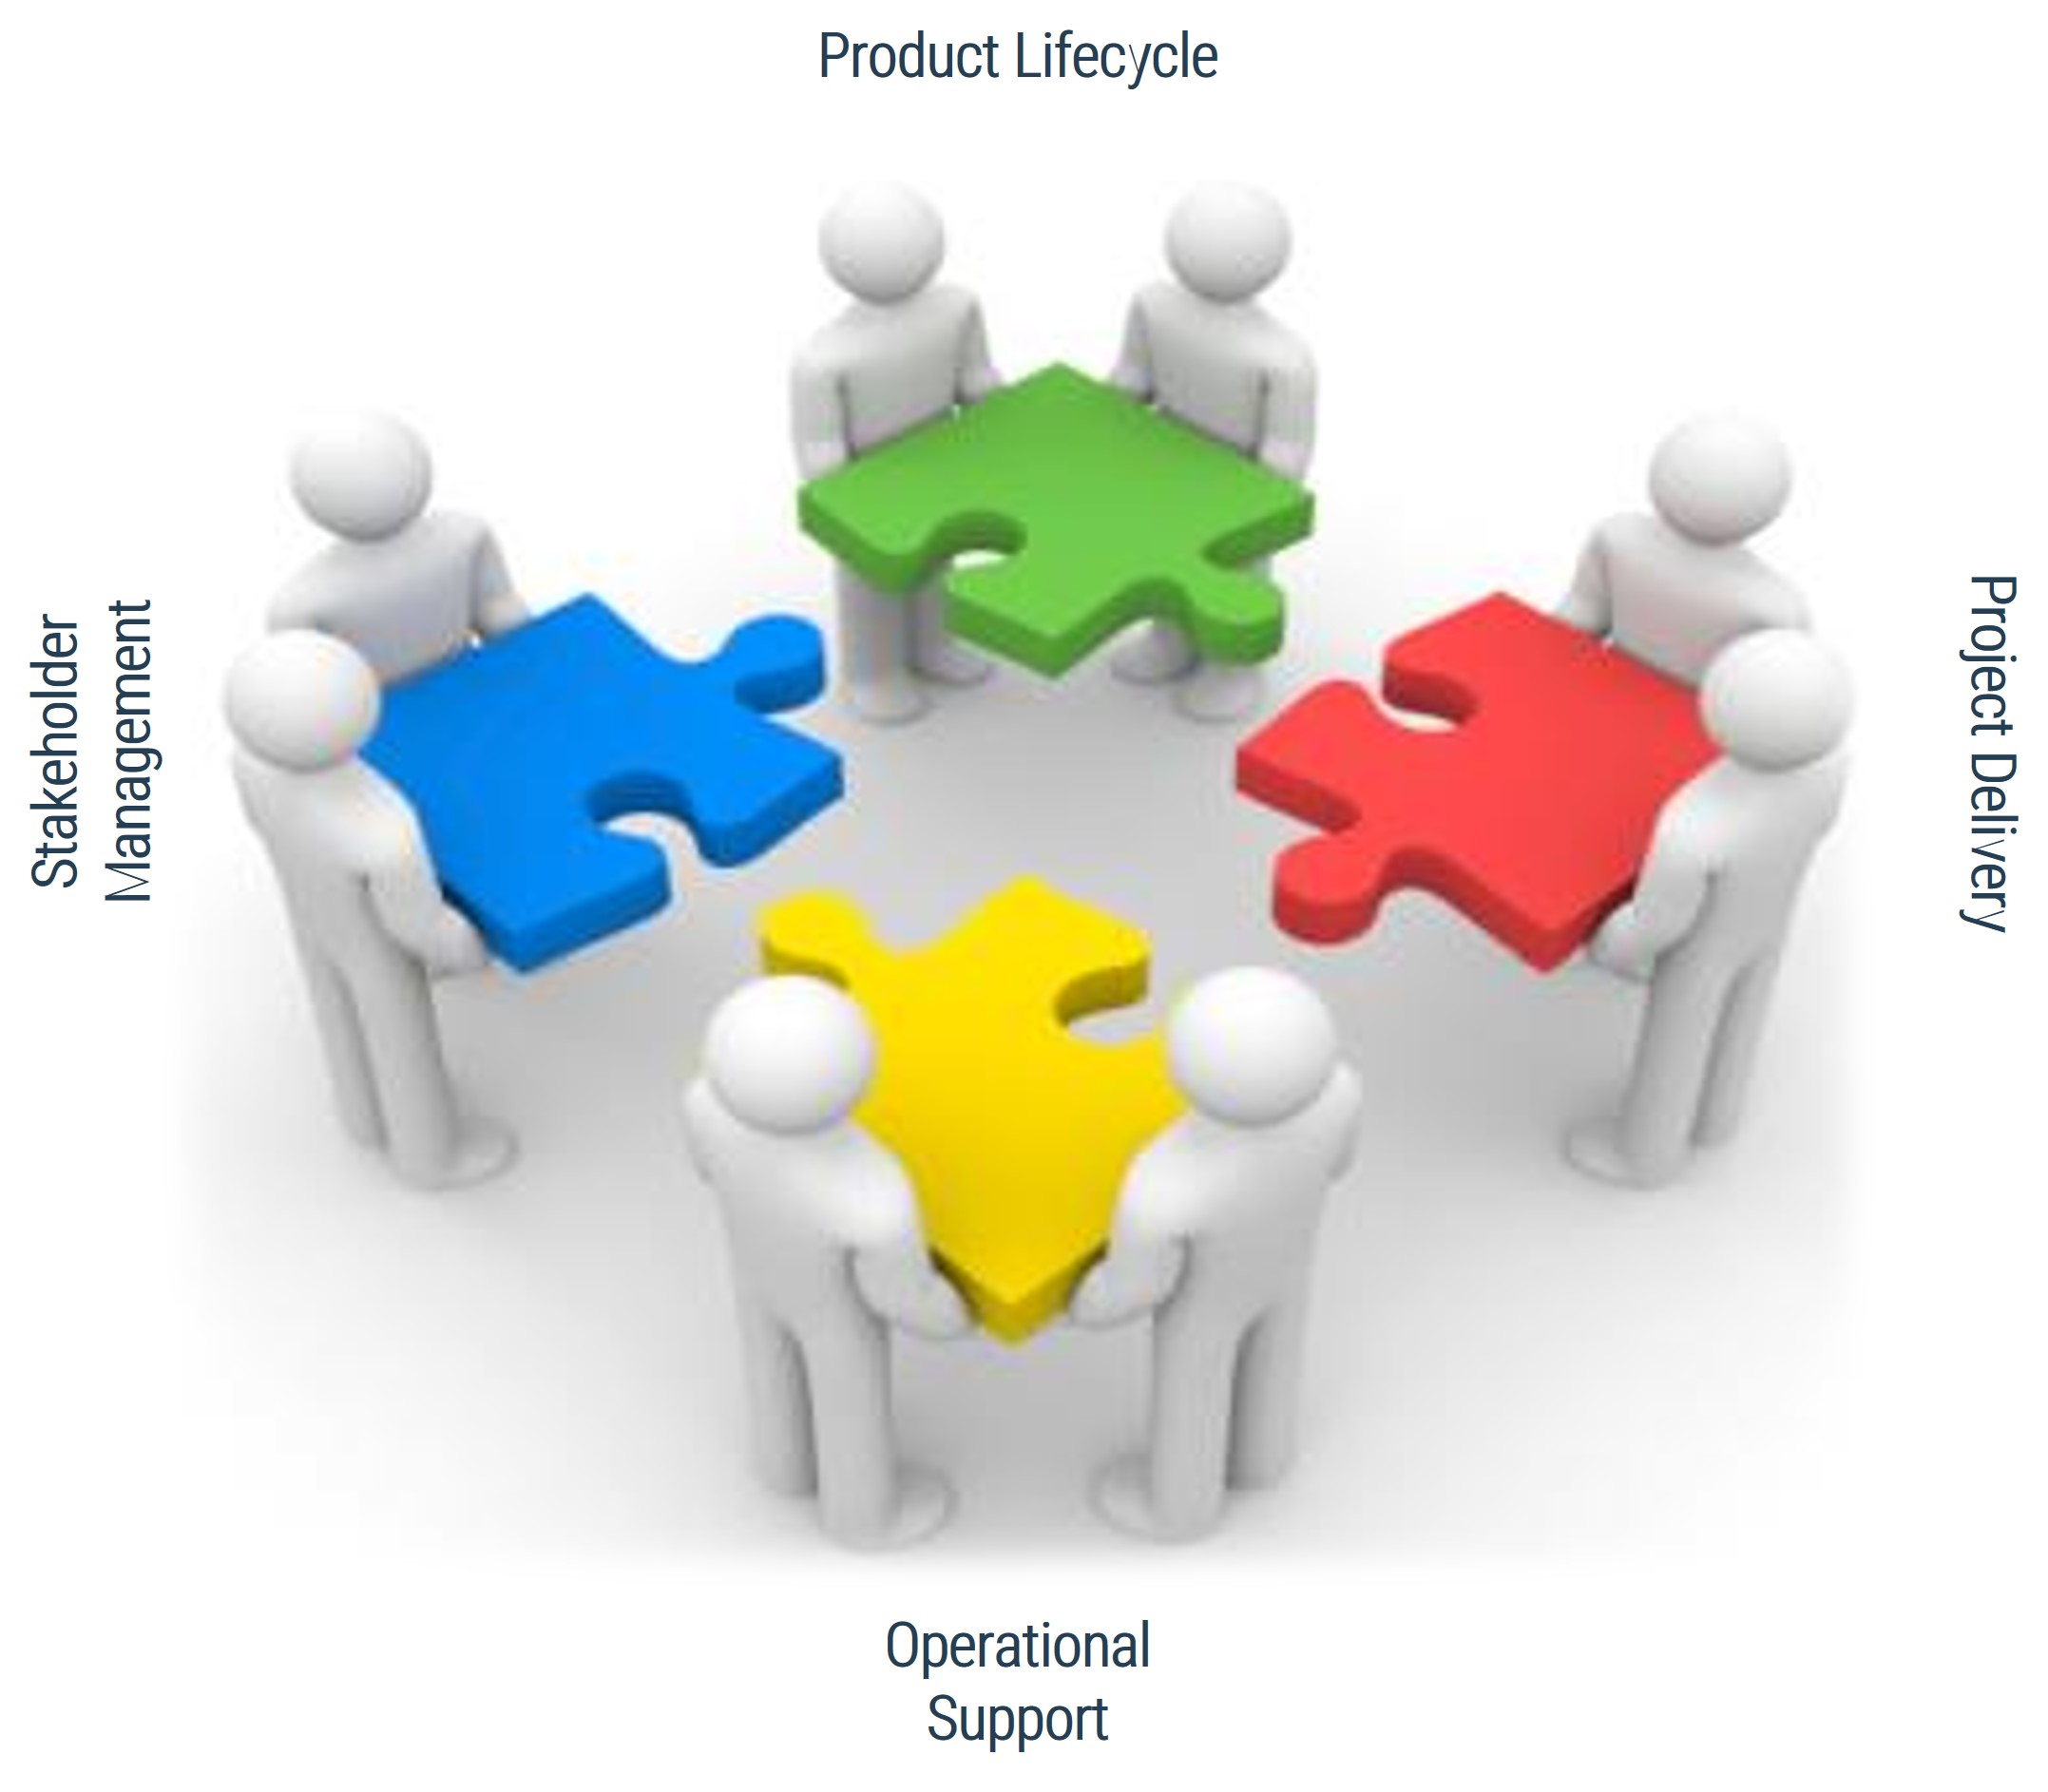 A picture is shown that has 4 characters with puzzle pieces, each repersenting a key to product family attainment. The four keys are: Stakeholder management, product lifecycle, project delivery, and operational support.